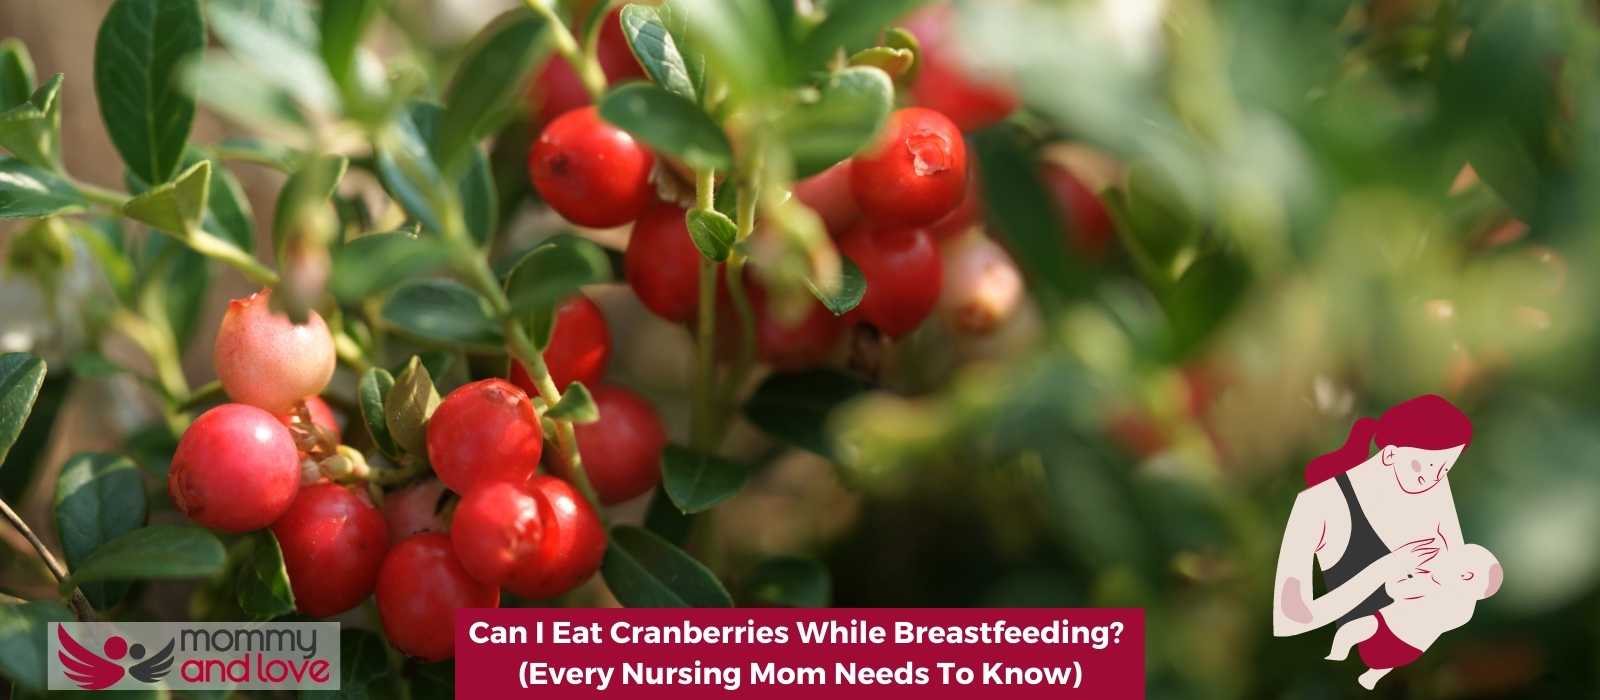 Can I Eat Cranberries While Breastfeeding (Every Nursing Mom Needs To Know)